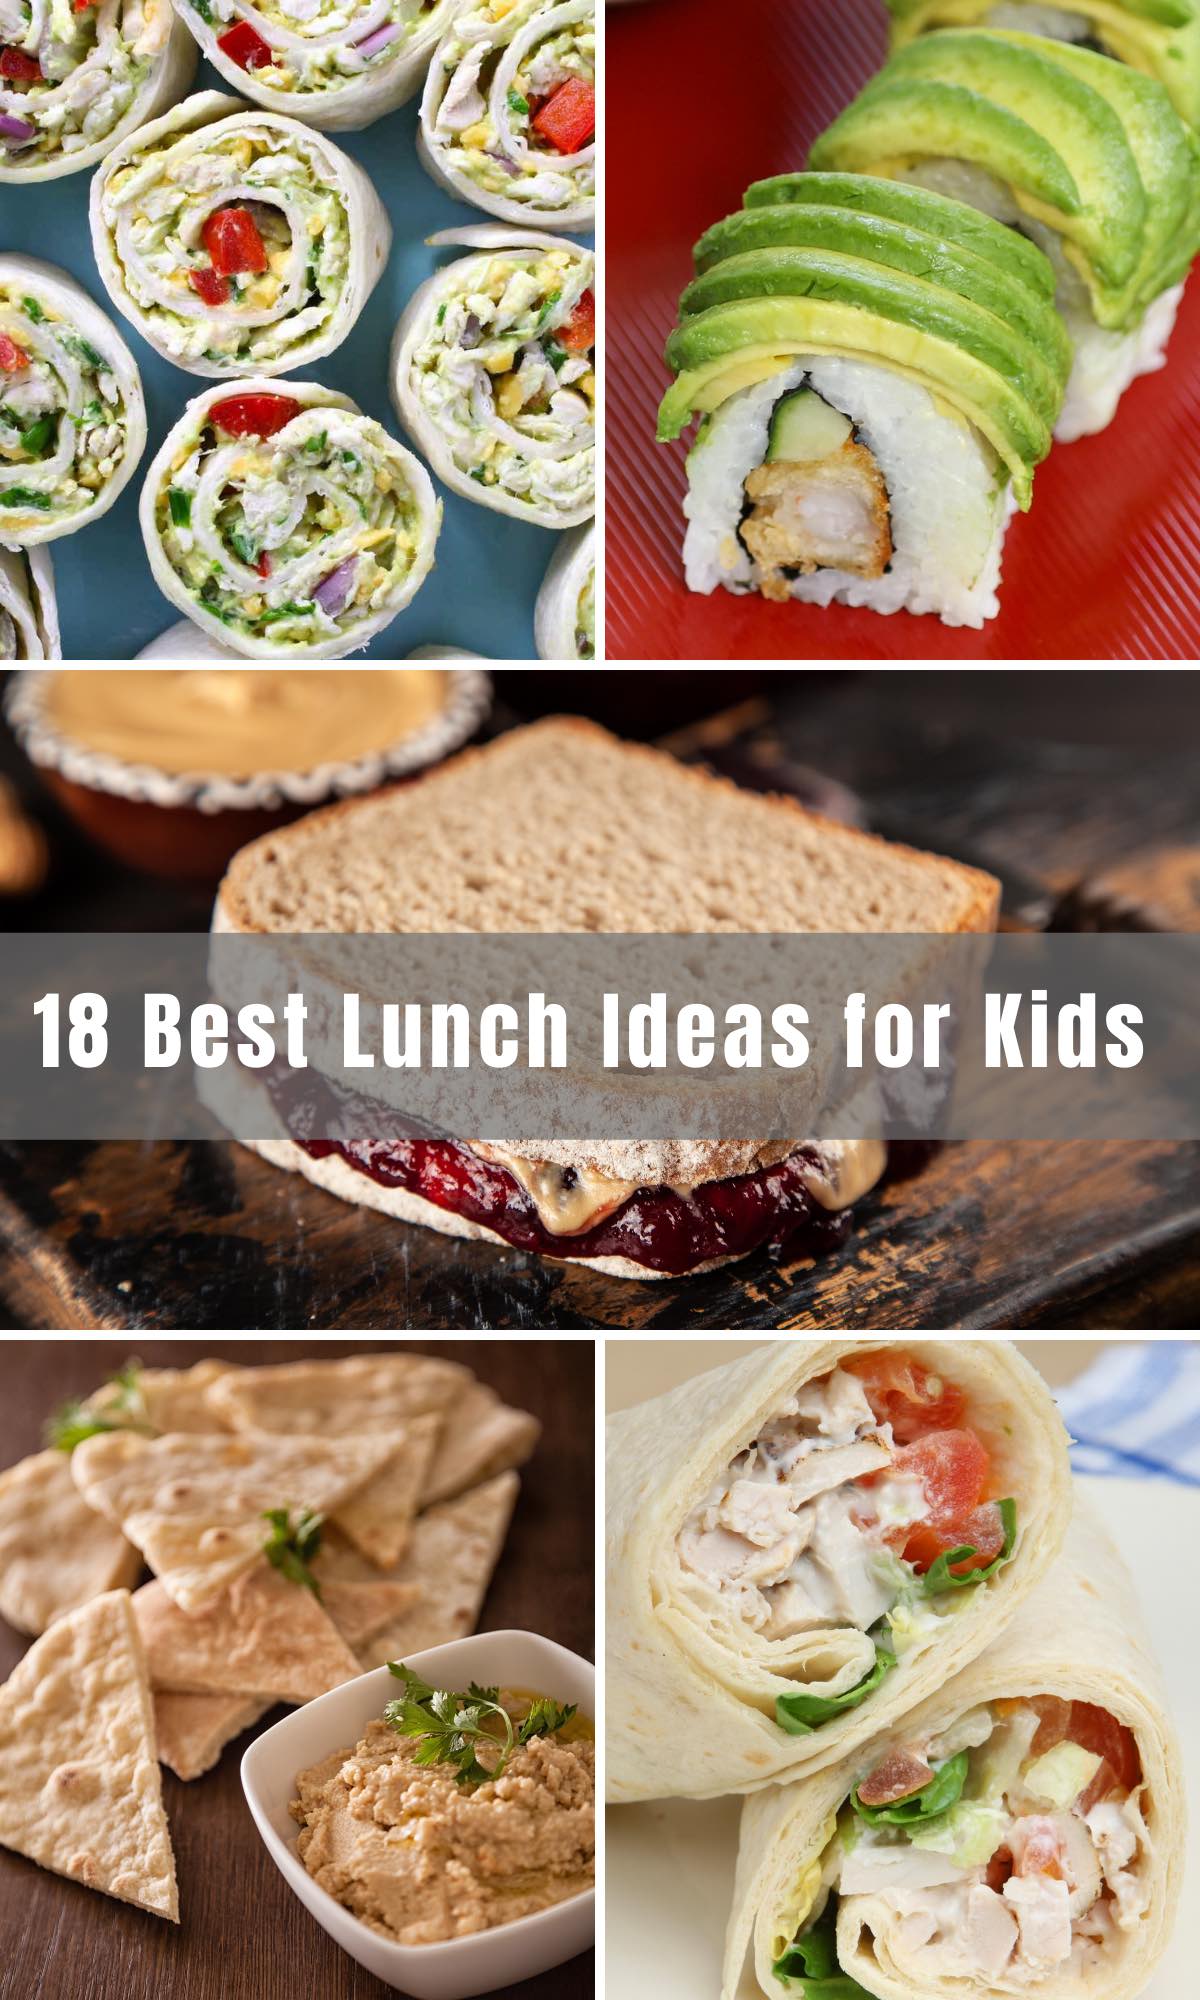 Sometimes, feeding kids can be a real challenge. As a parent, you’re more concerned with nutrition and cost than with fun. We’ve rounded up 18 Easy Lunch Ideas for Kids to give you the best of both!